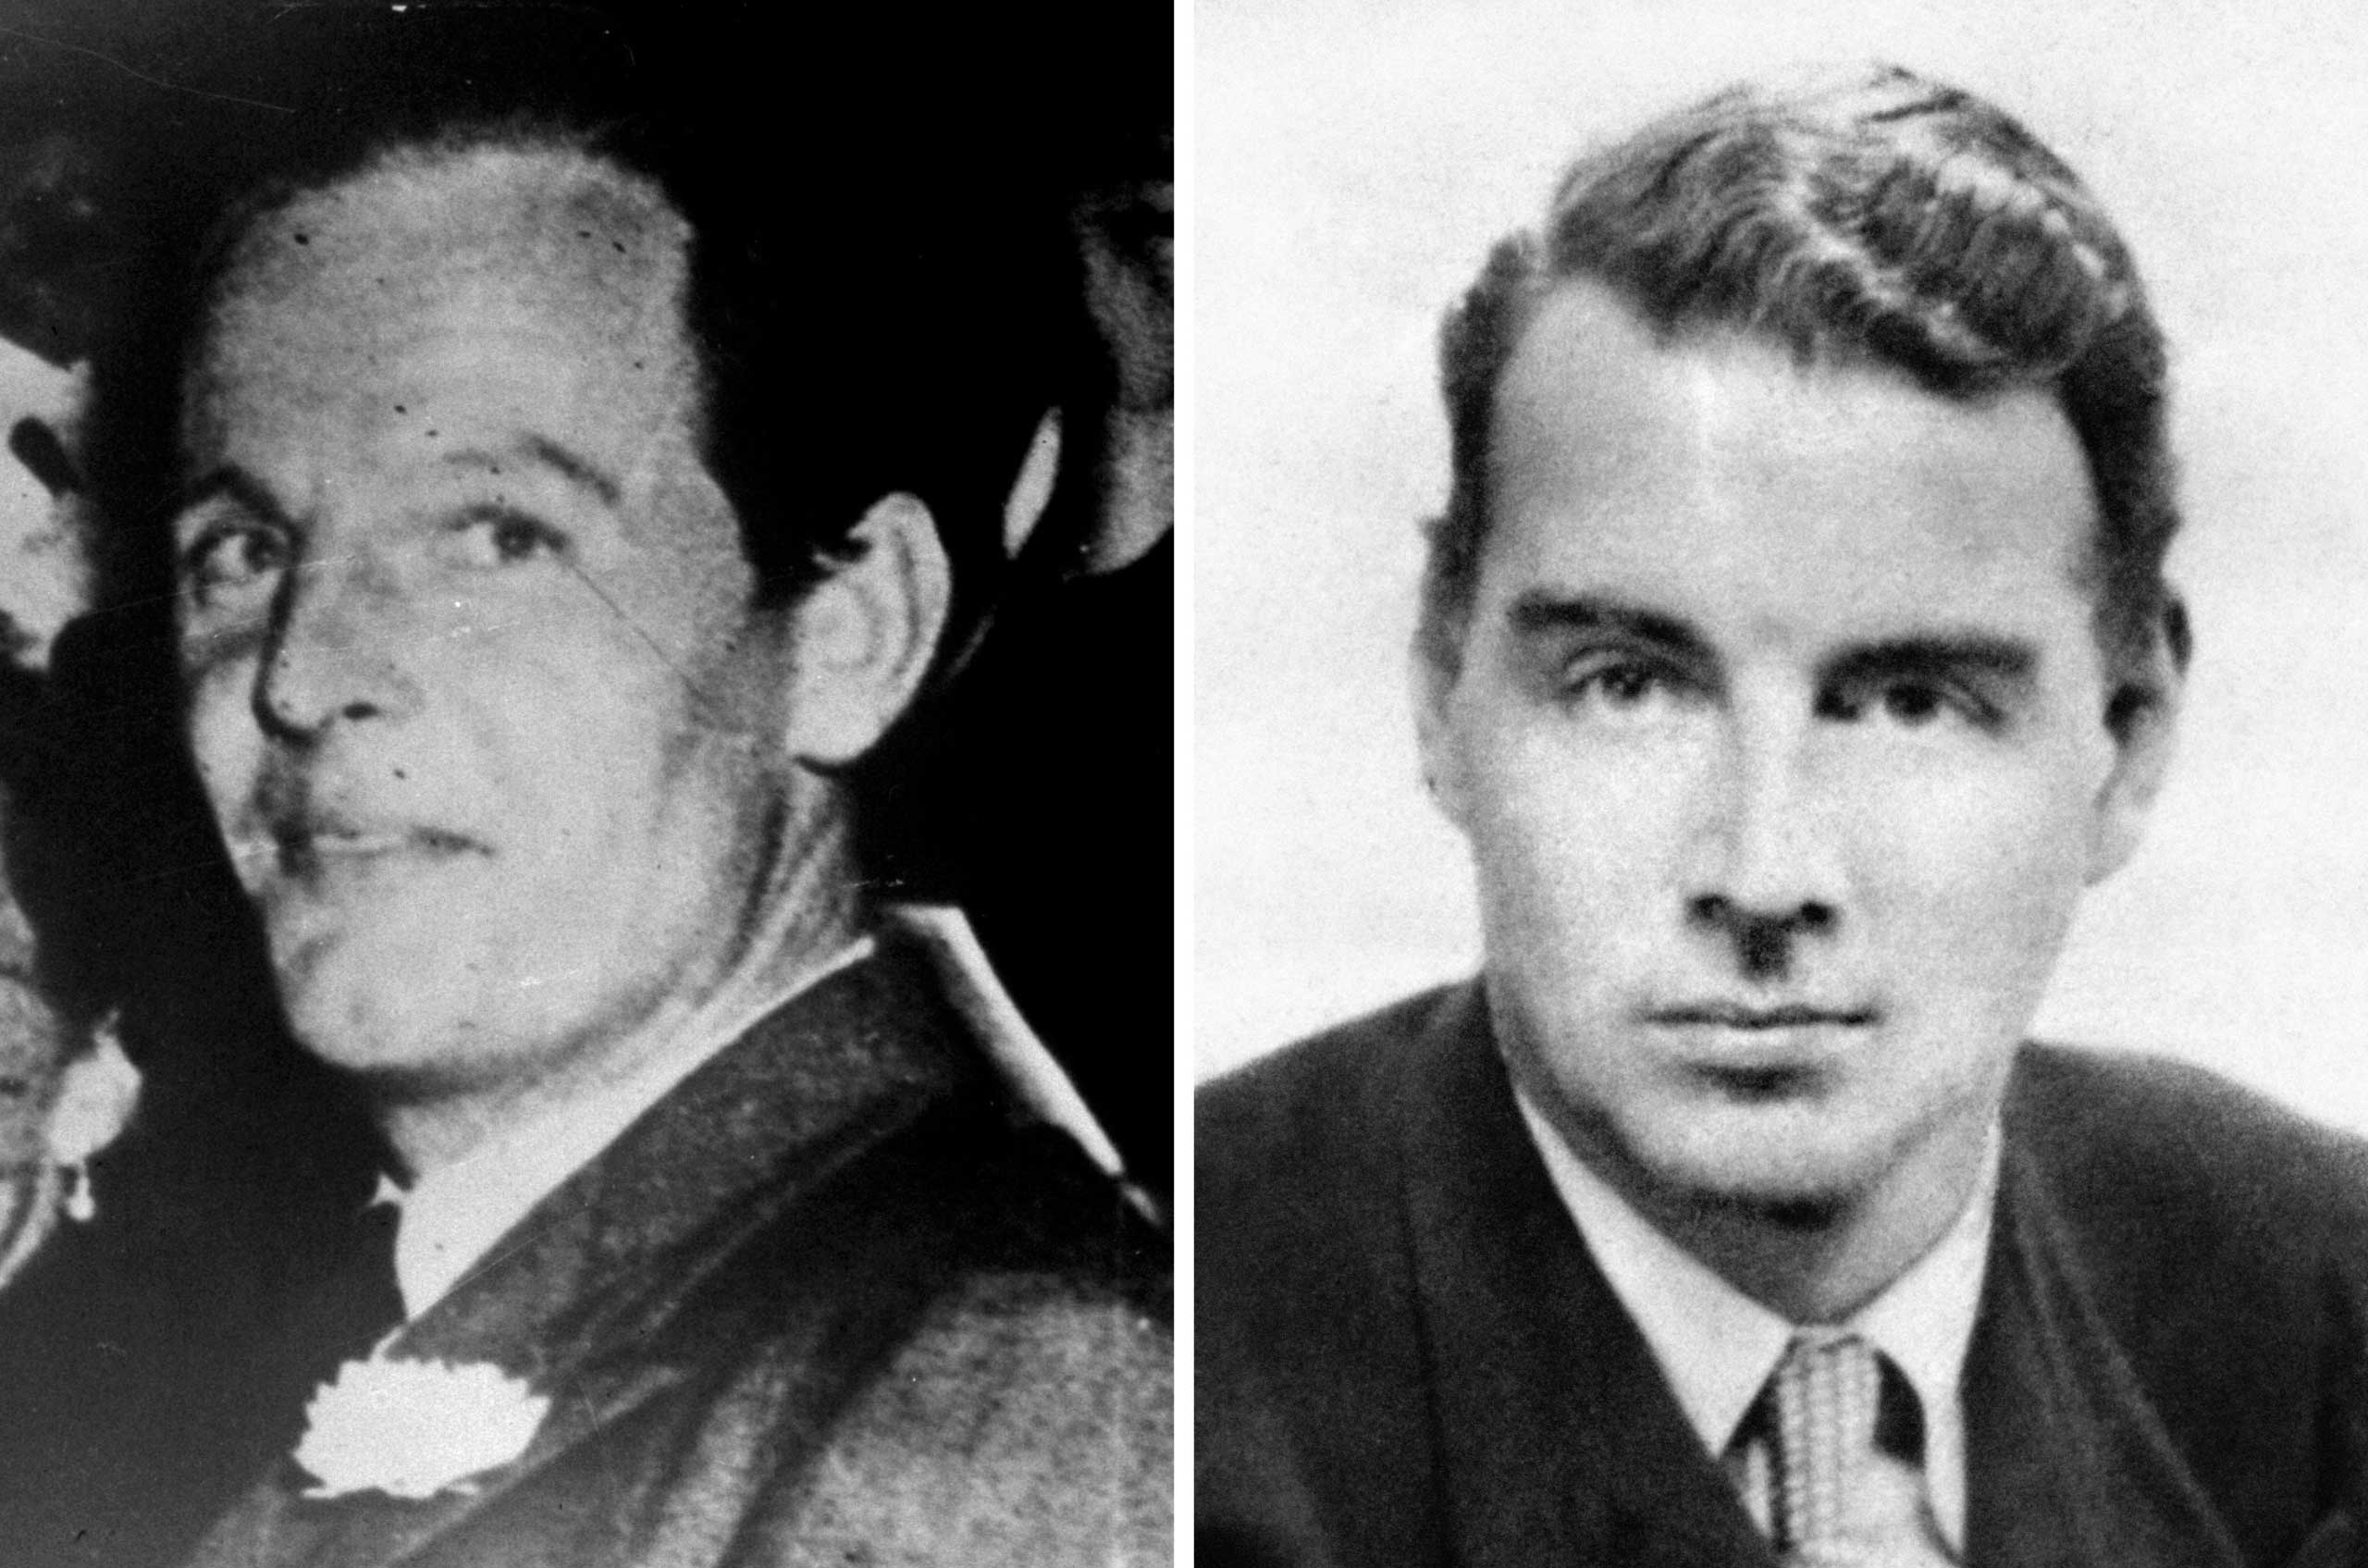 Soviet spies Donald Maclean (left) and Guy Burgess, as official files made public for the first time reveal that Kim Philby made desperate attempts to save his skin after the flight of his fellow Soviet spies, Oct. 23, 2015. (PA Images)